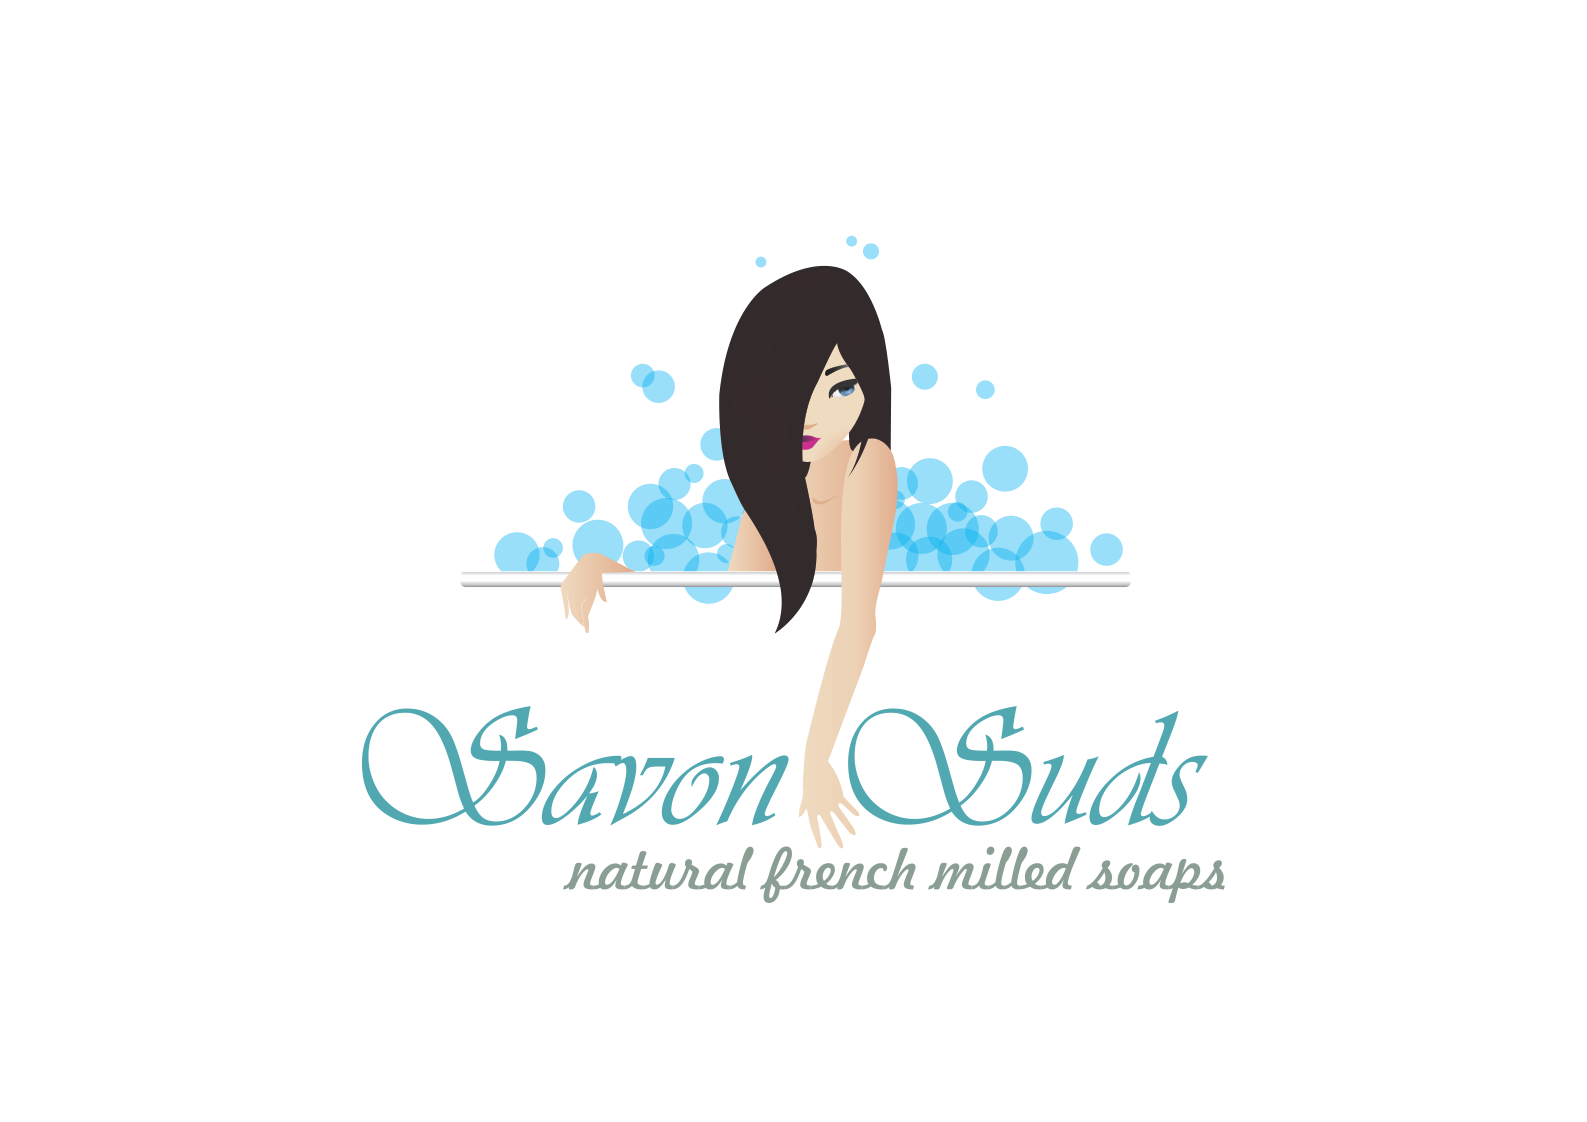 soap clipart suds